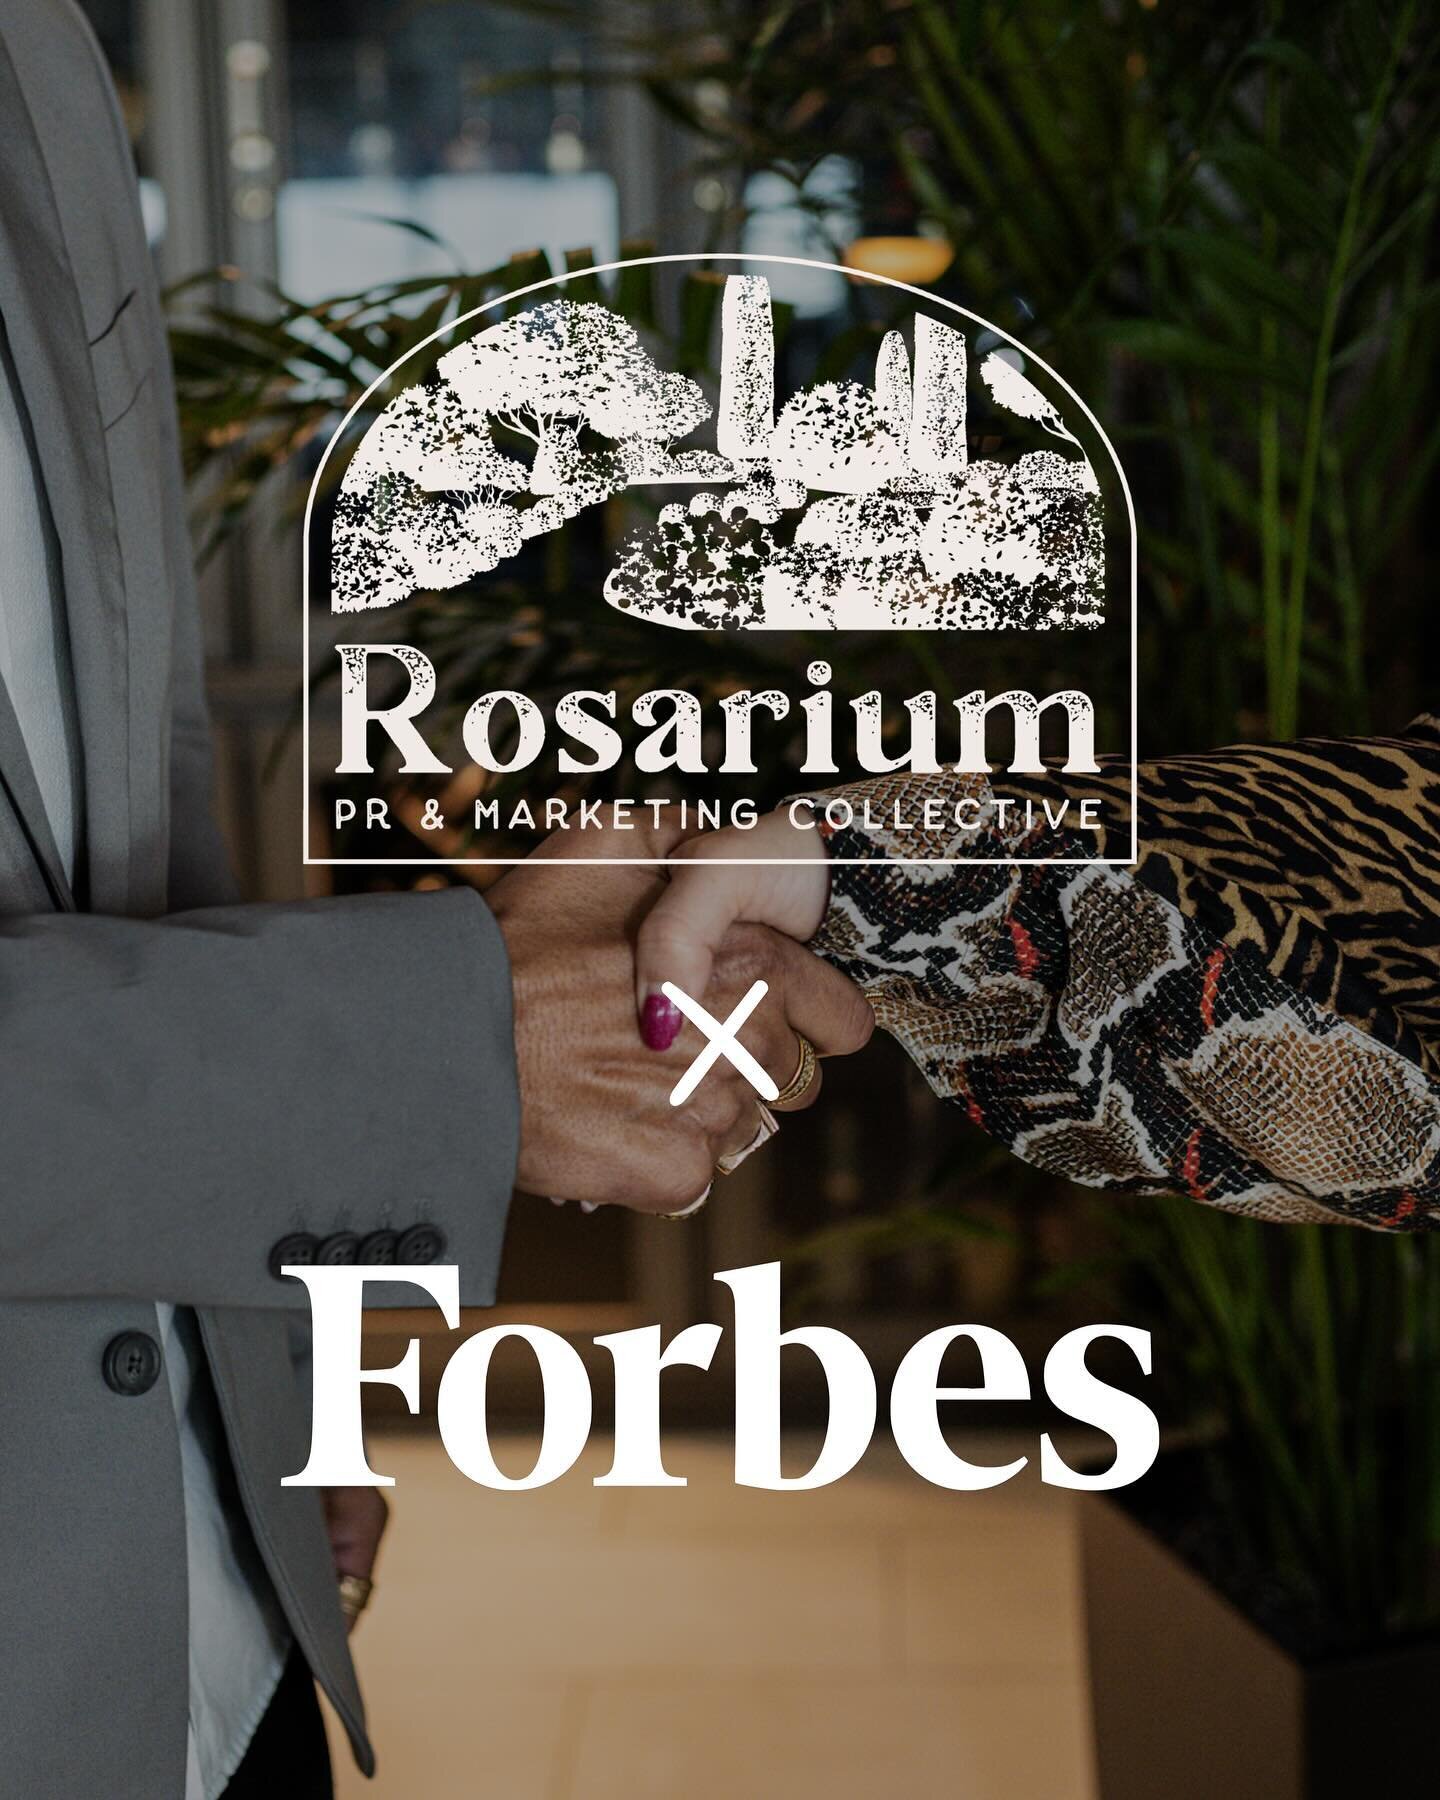 Get your name featured in Forbes! 📣

We are excited to officially announce our media partnership with Forbes for company leaders who meet Forbes Business Council requirements. This opportunity is exclusive to Rosarium clients. The perks are endless 